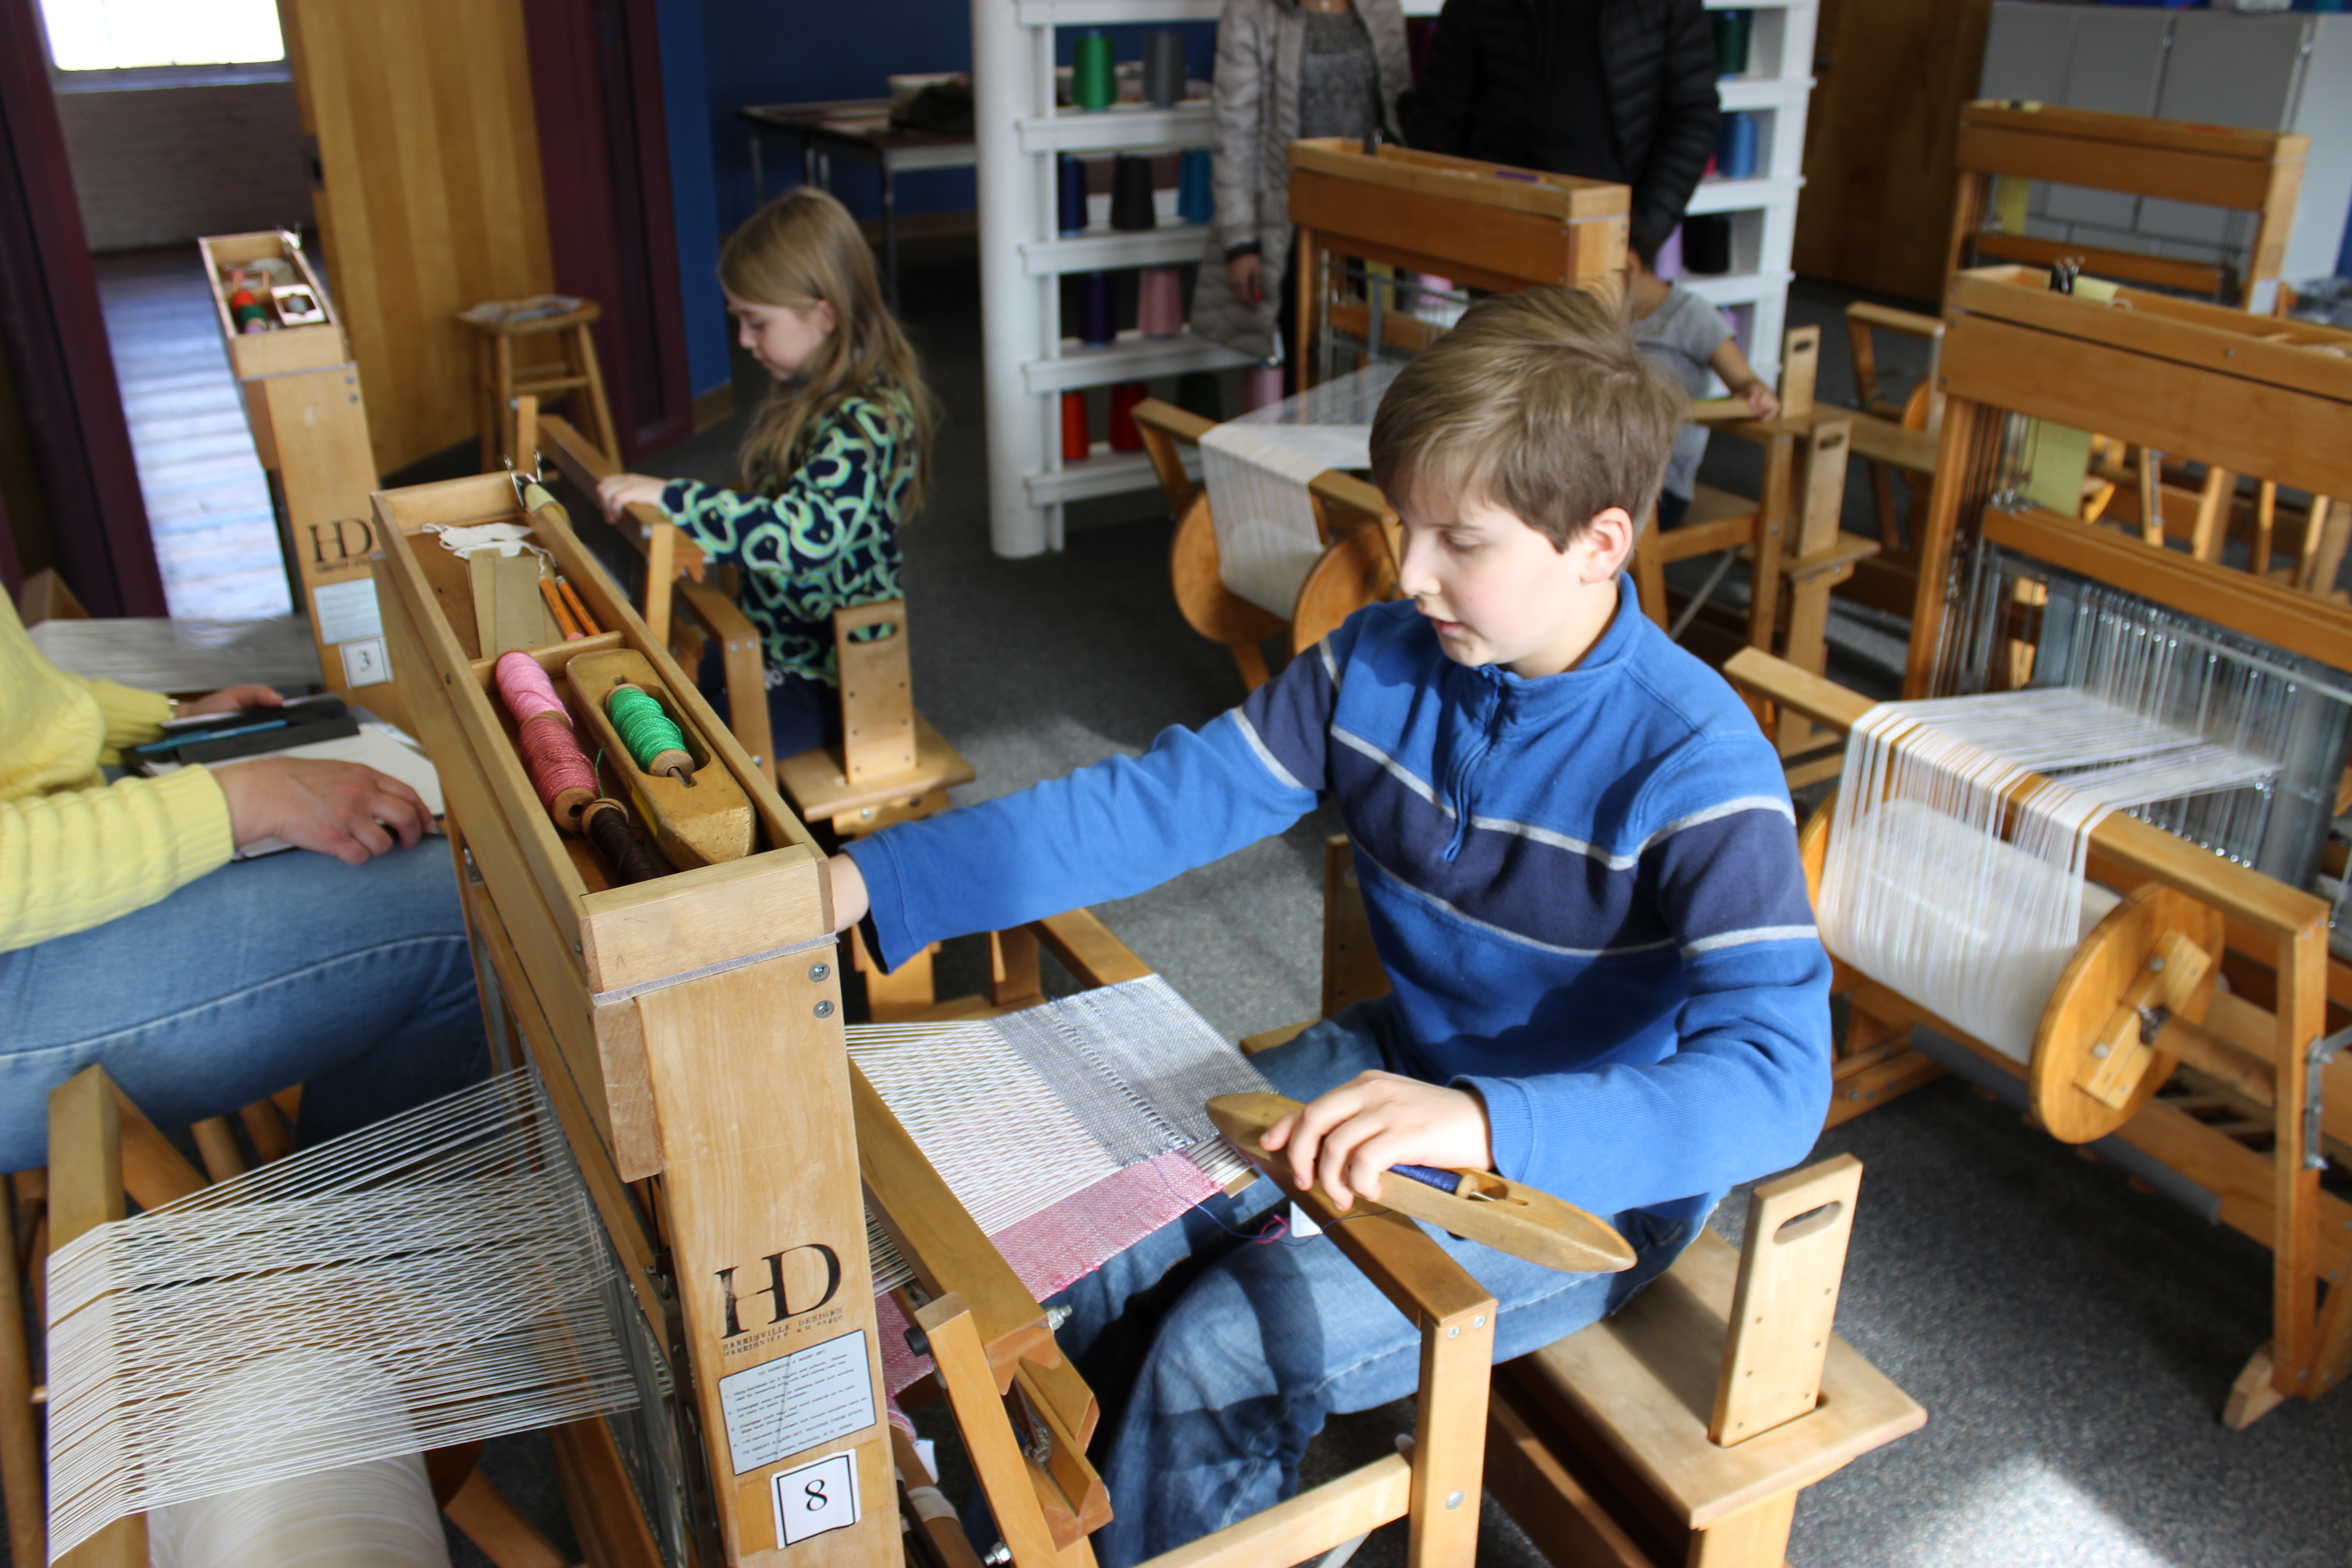 Two students weaving on the looms at the education center.